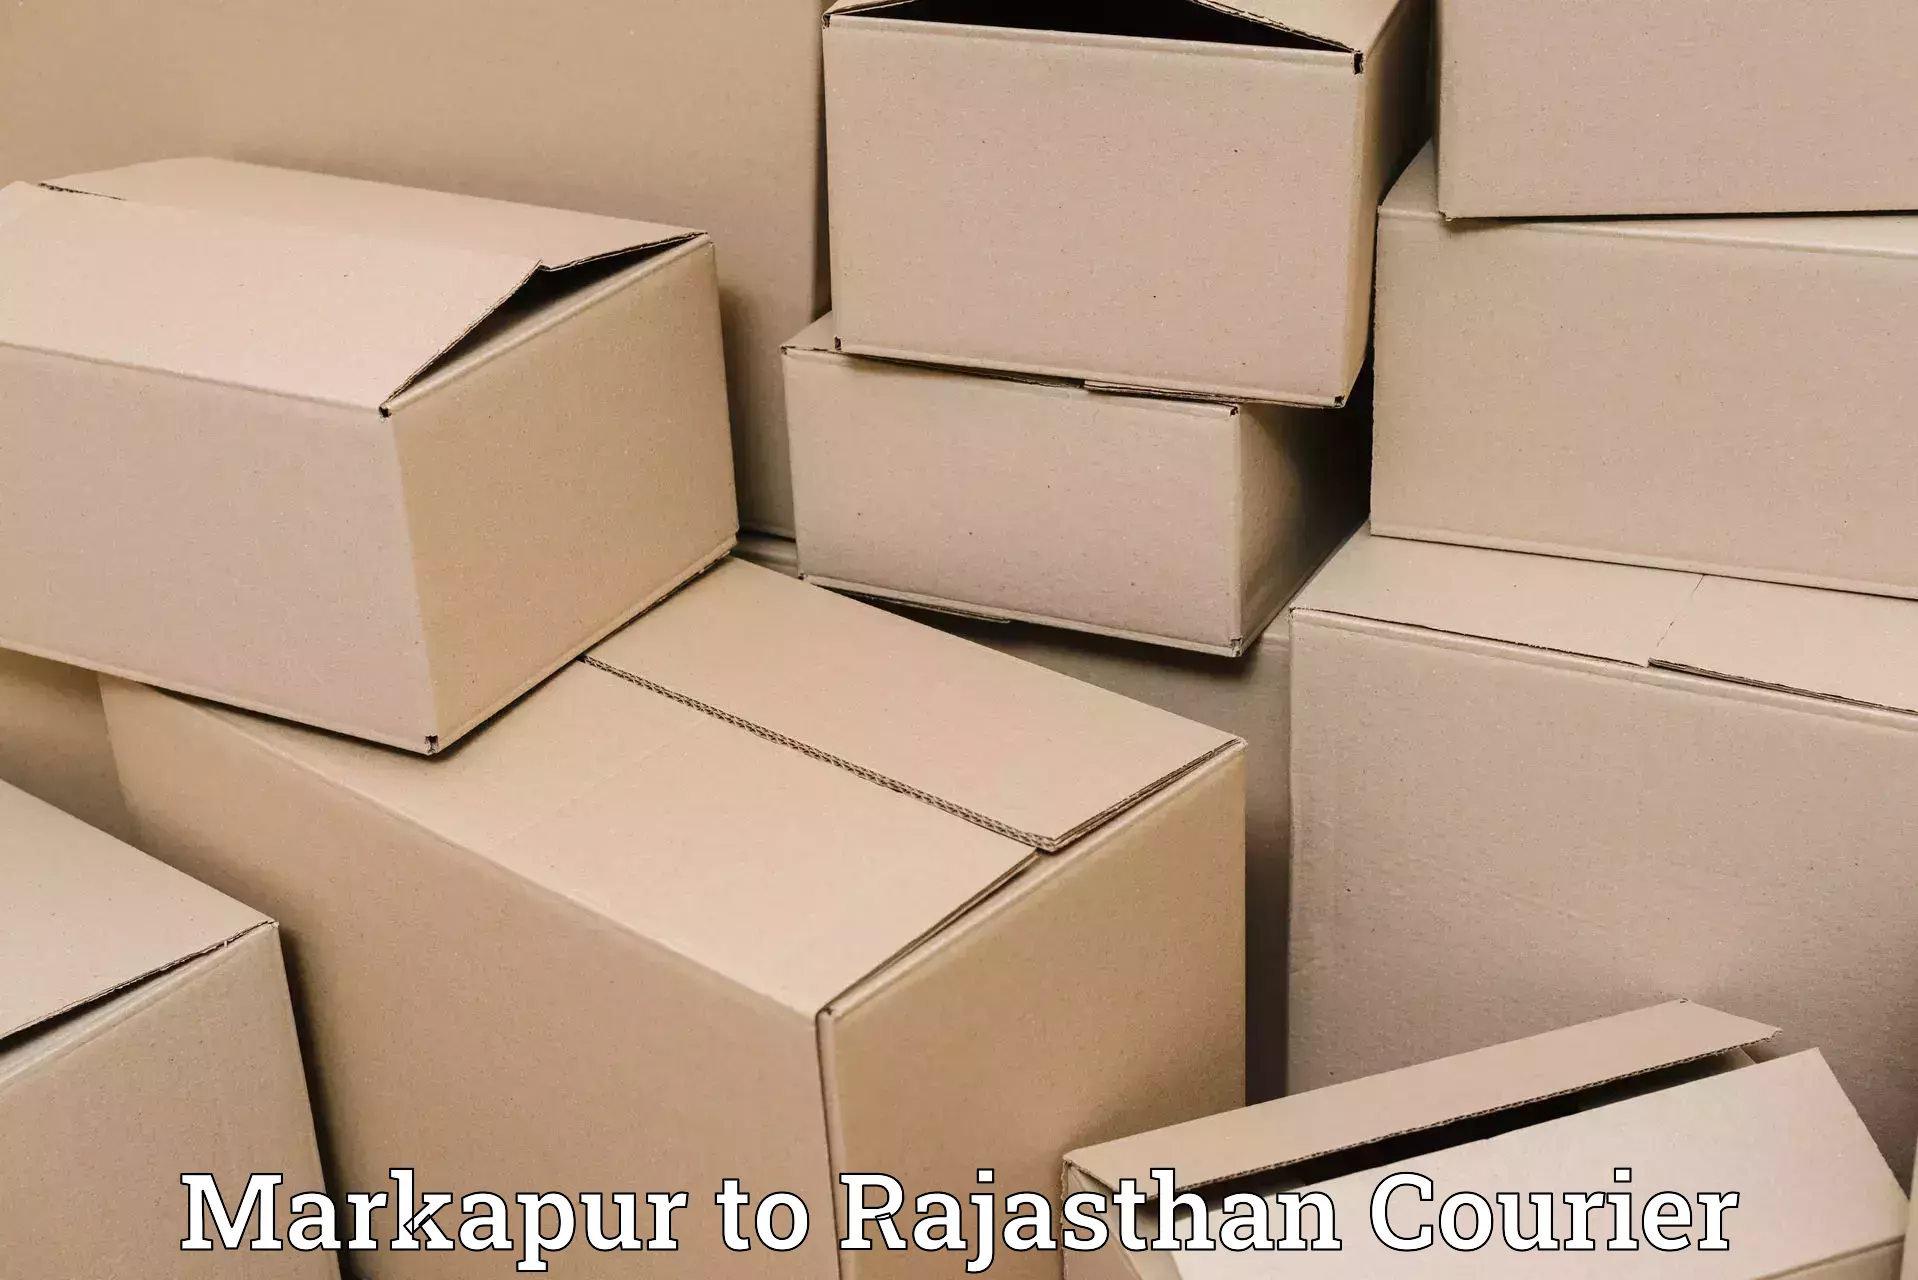 Business delivery service Markapur to Fatehpur Sikar